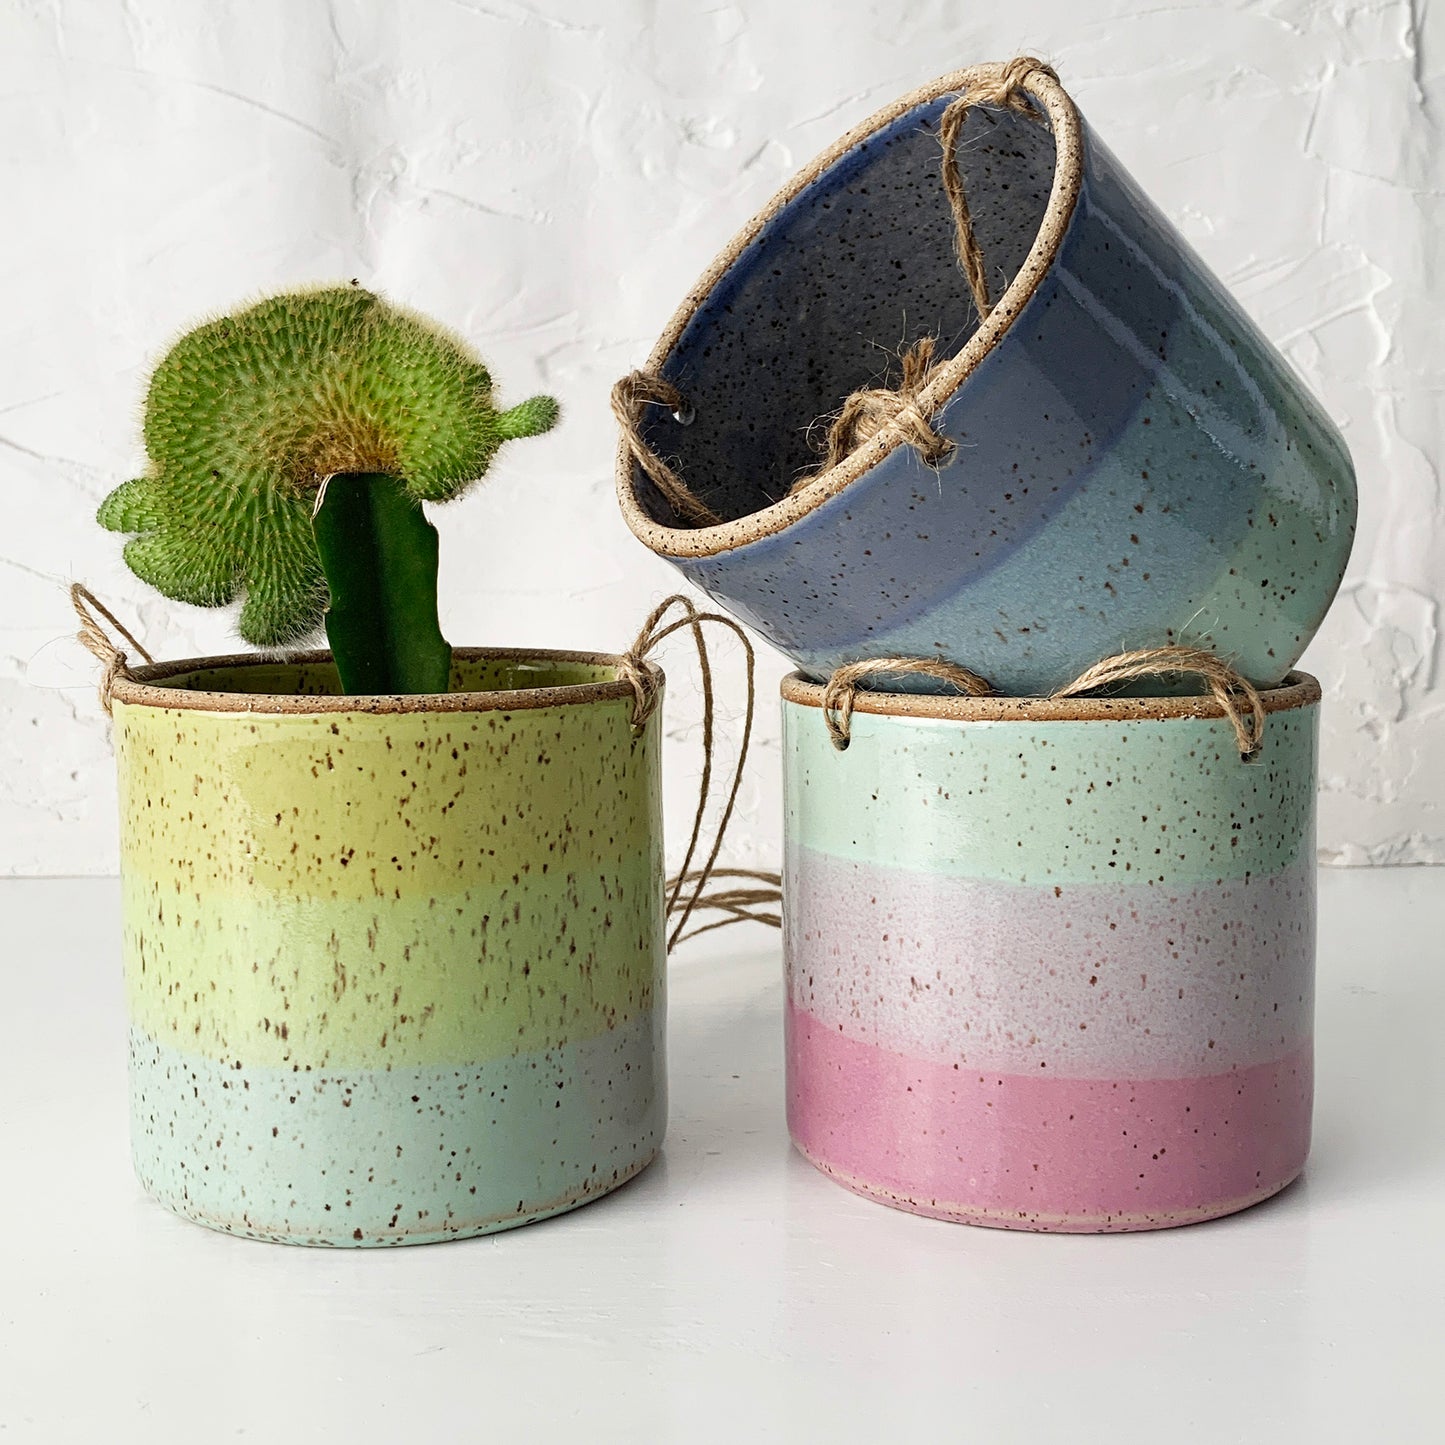 NEW SIZE - Brighter Days Hanging Stoneware Planter - Available in Assorted Colors